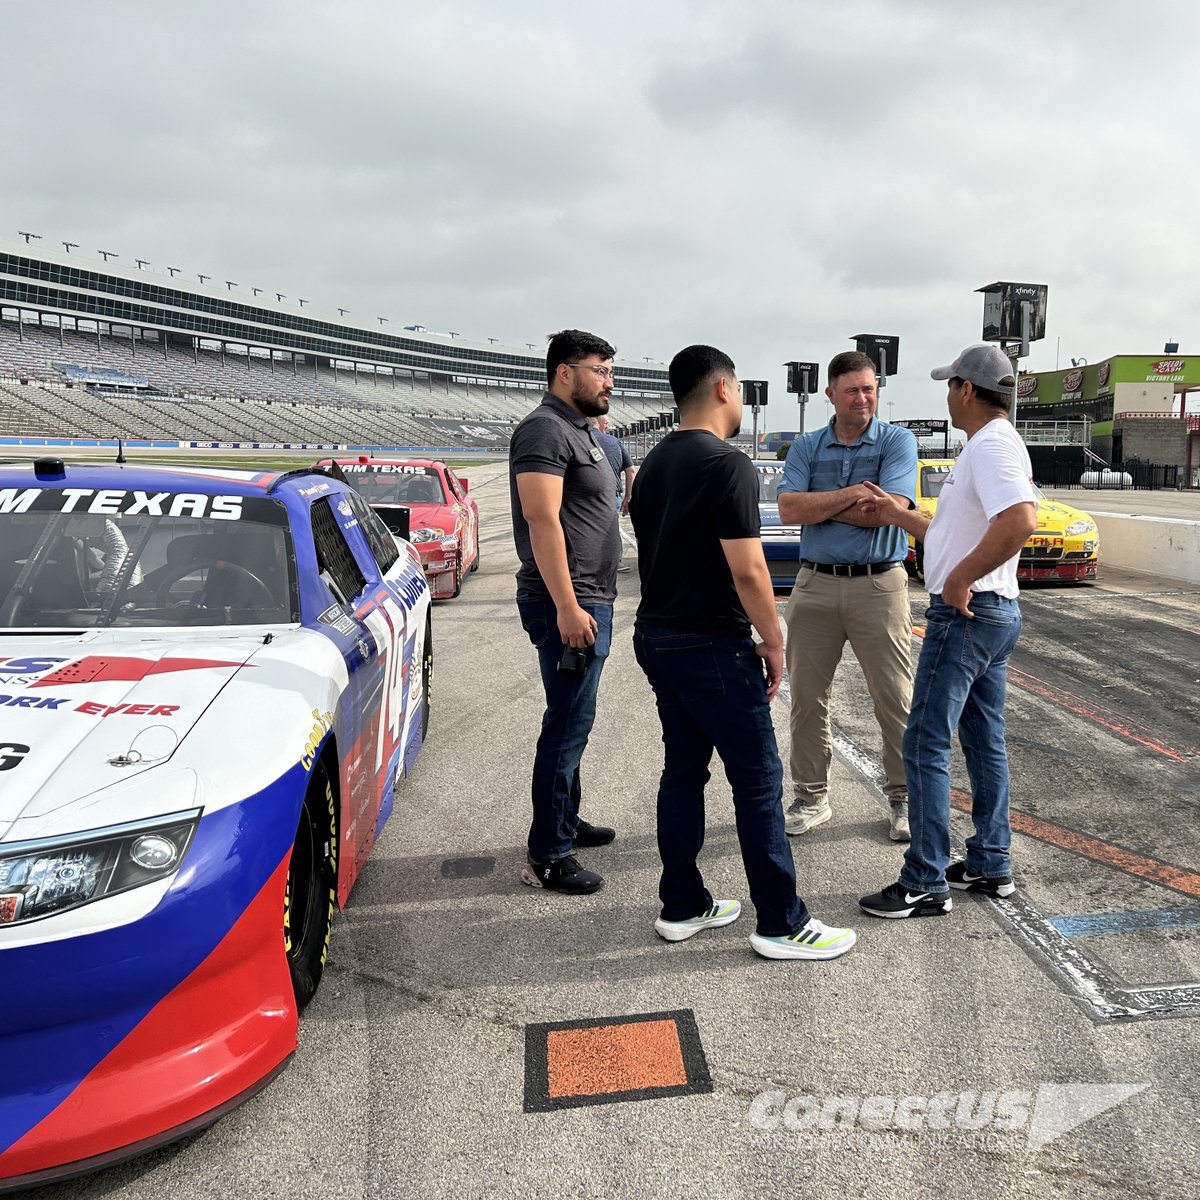 Last week we had a great time hanging out at the Team Texas Racing School with the LP Building Solutions team! They did stock car rides and drives, and Noah Weber had the chance to talk with them about how ConectUS Wireless can help them and their customers.